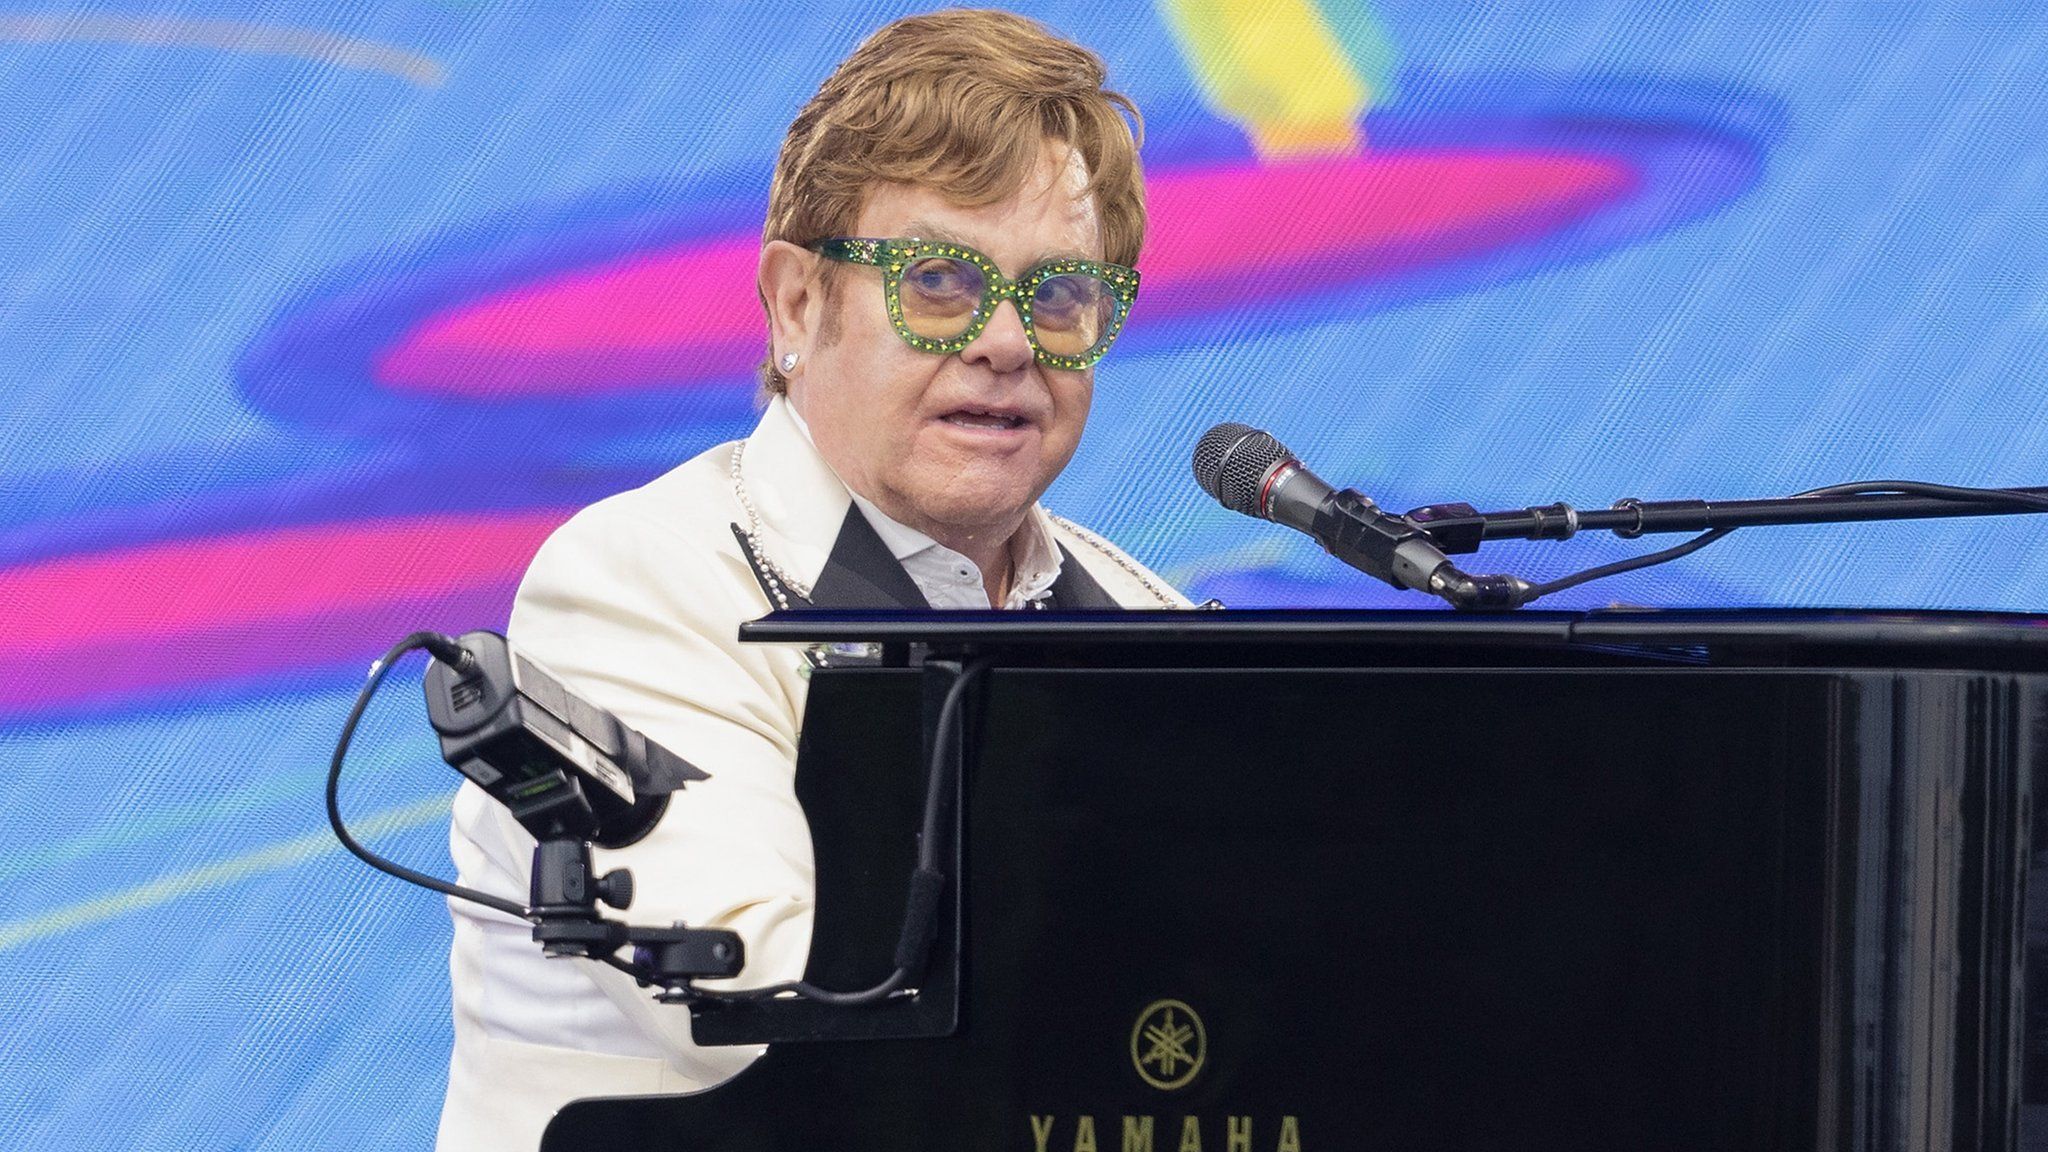 Sir Elton John pictured on his farewell tour, which he is currently performing around the world